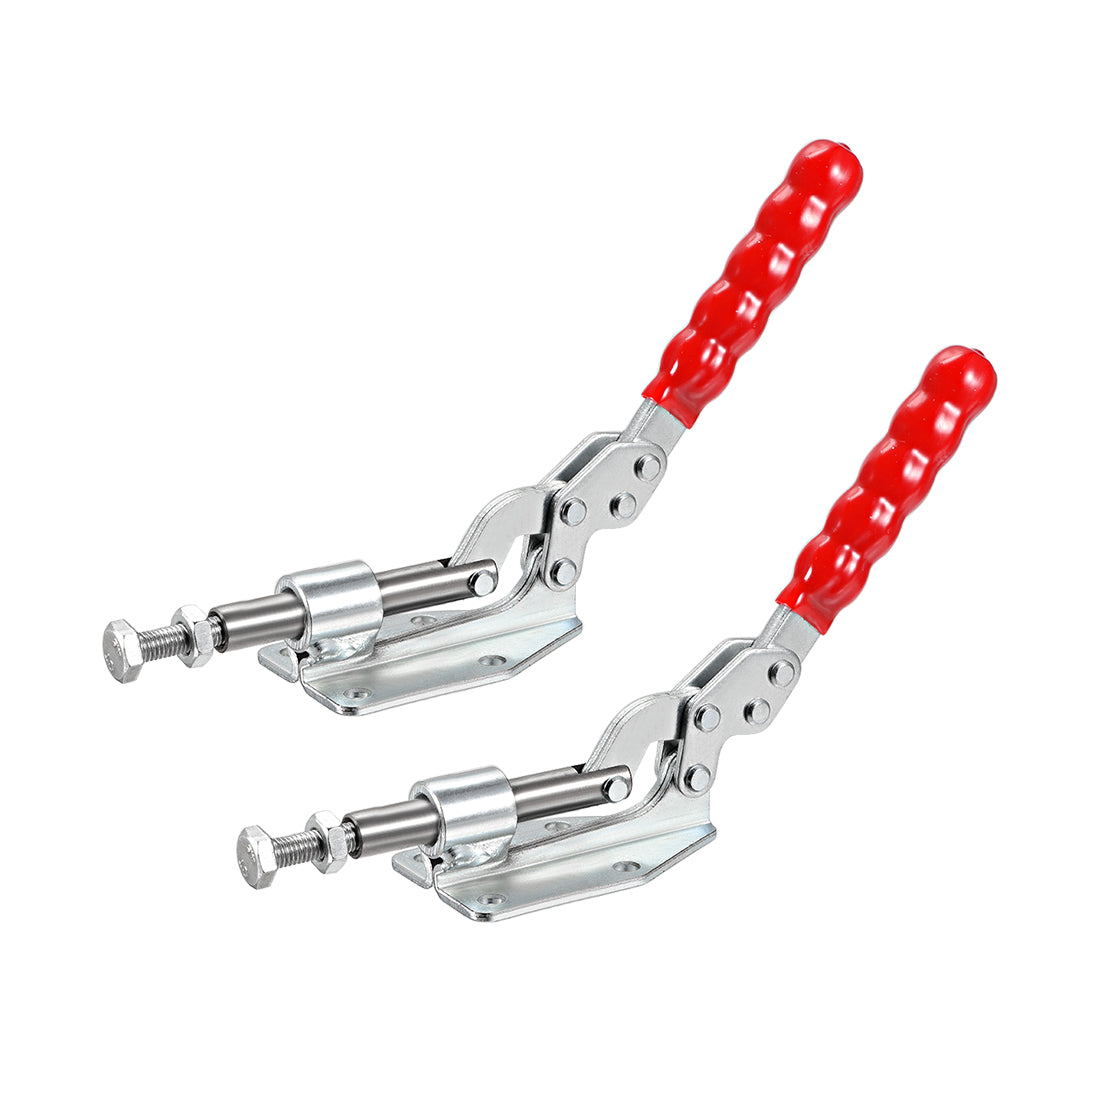 uxcell Uxcell 2 Pcs Hand Tool Pull Push Action Toggle Clamp Quick Release Clamp 400 Lbs/180kg Holding Capacity 30mm Stroke